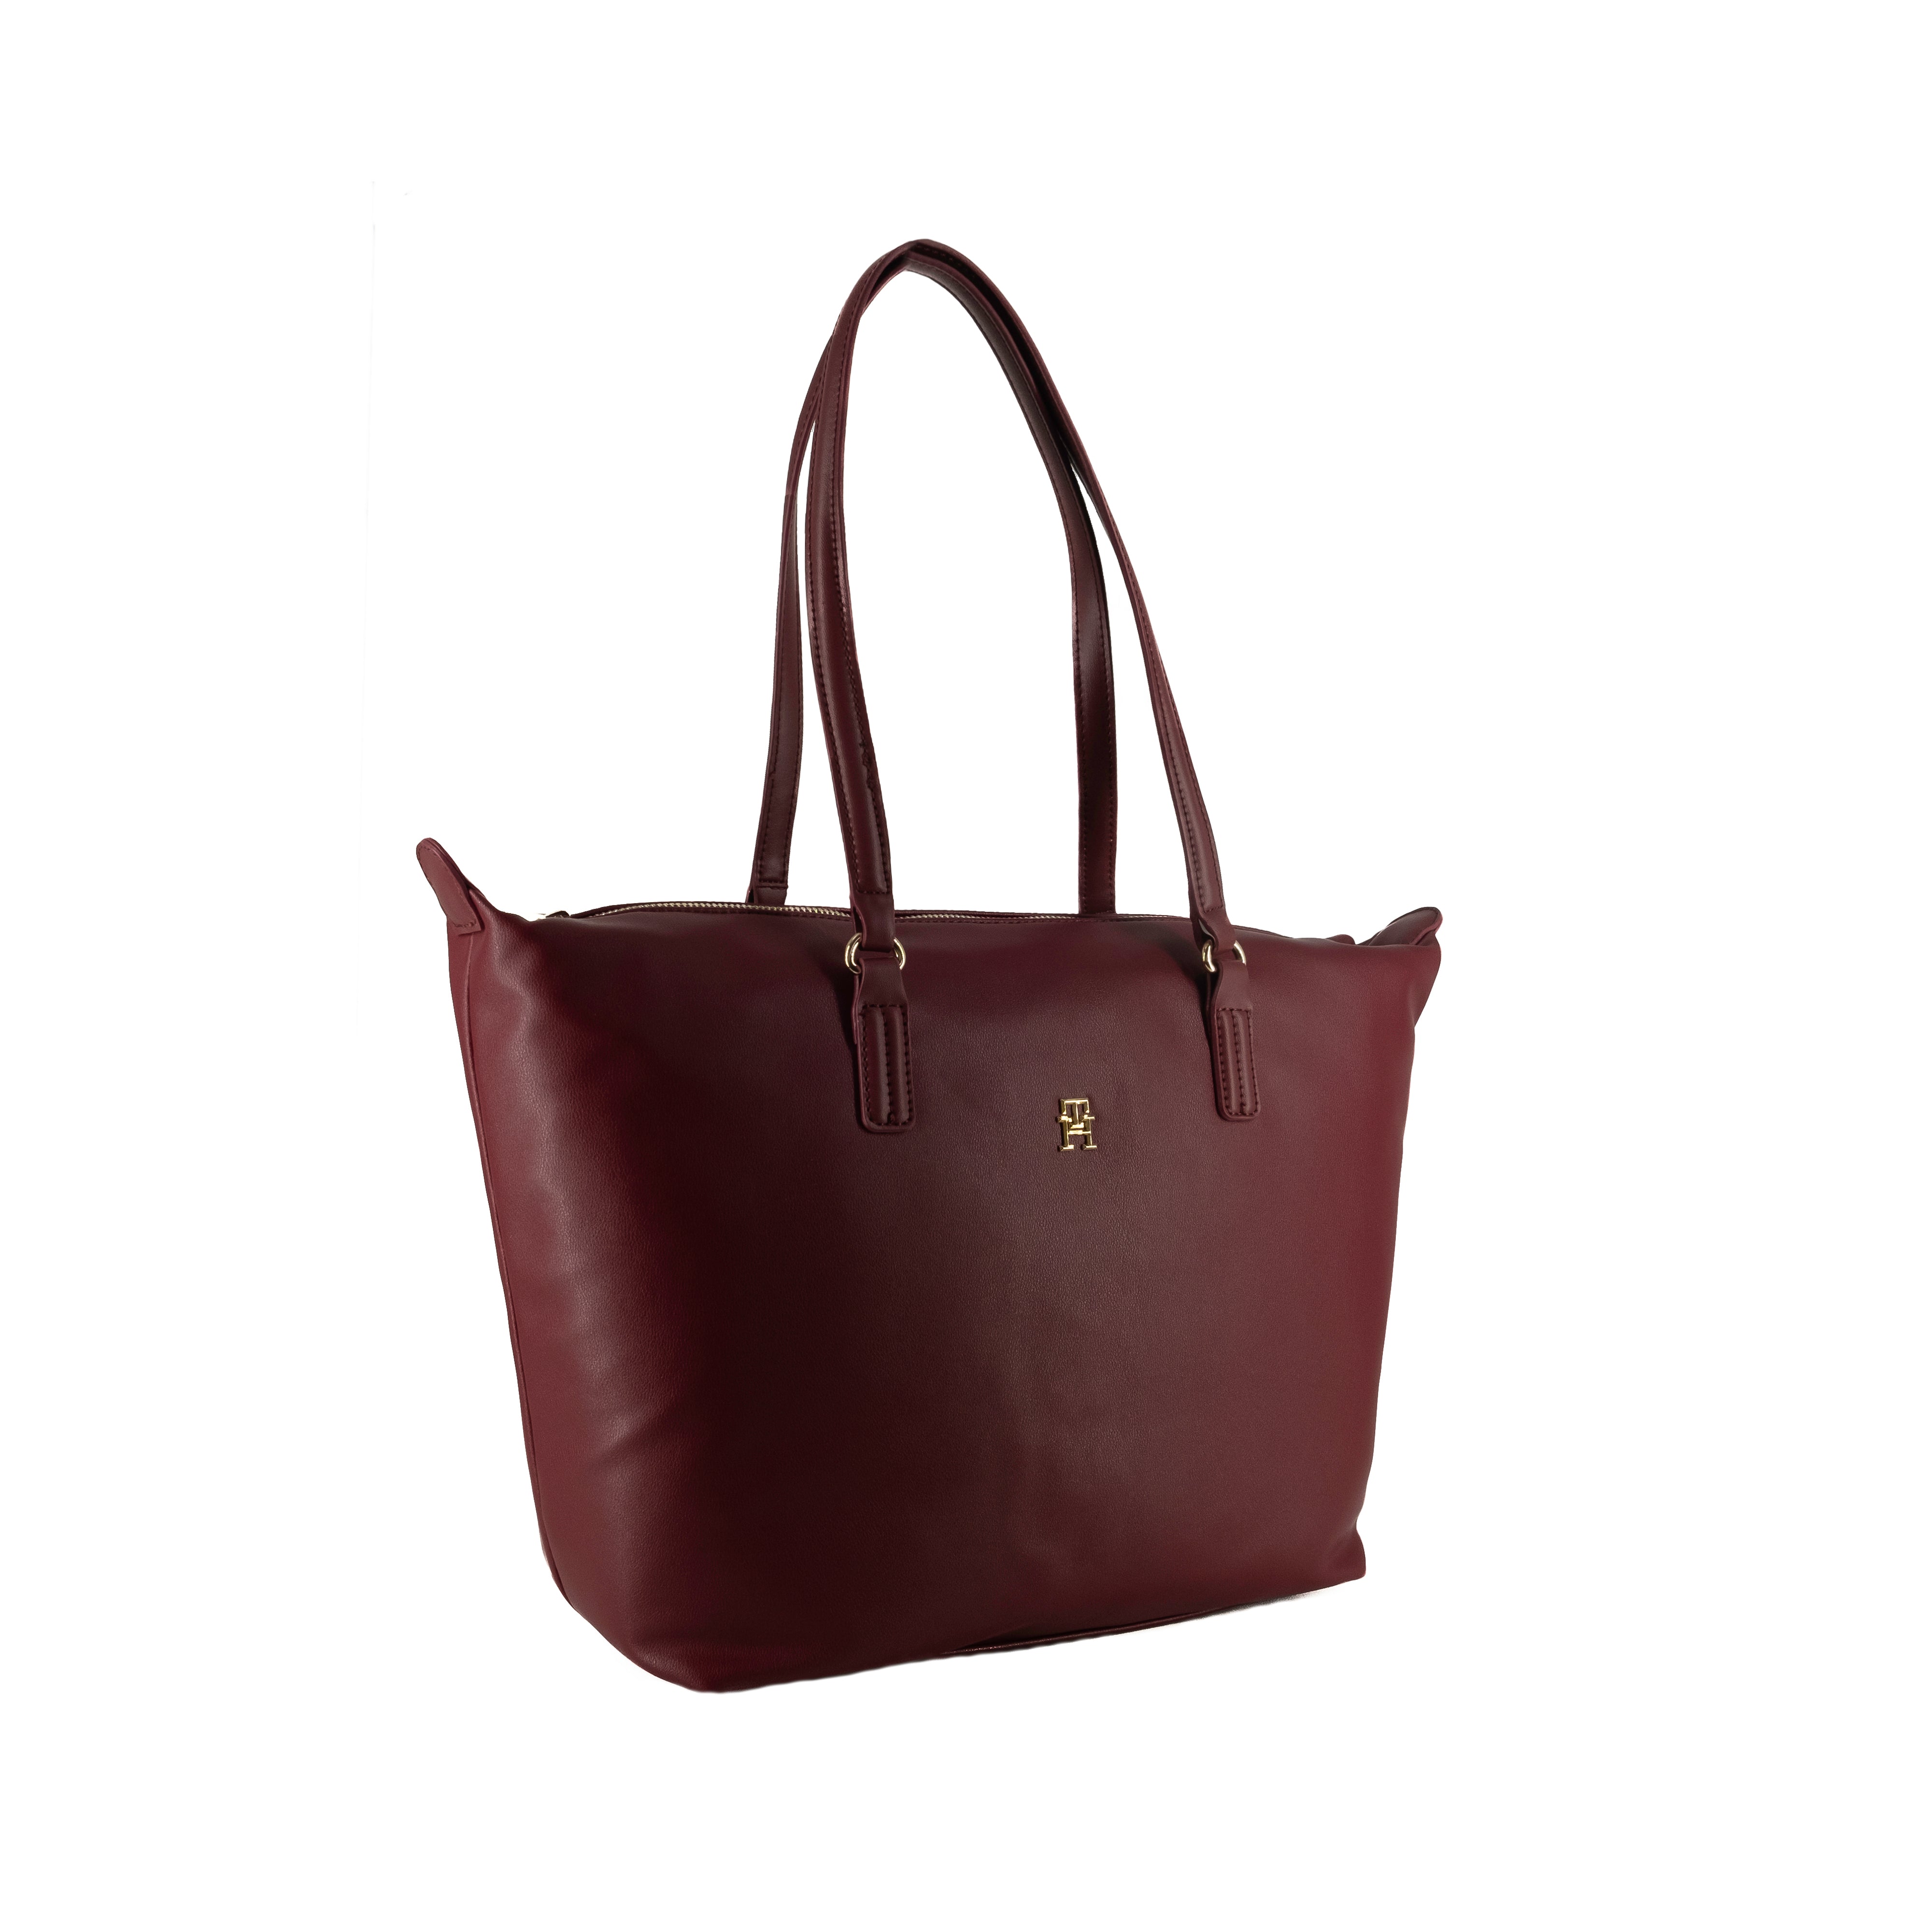 Tommy Hilfiger Tote Bag "Poppy" Red